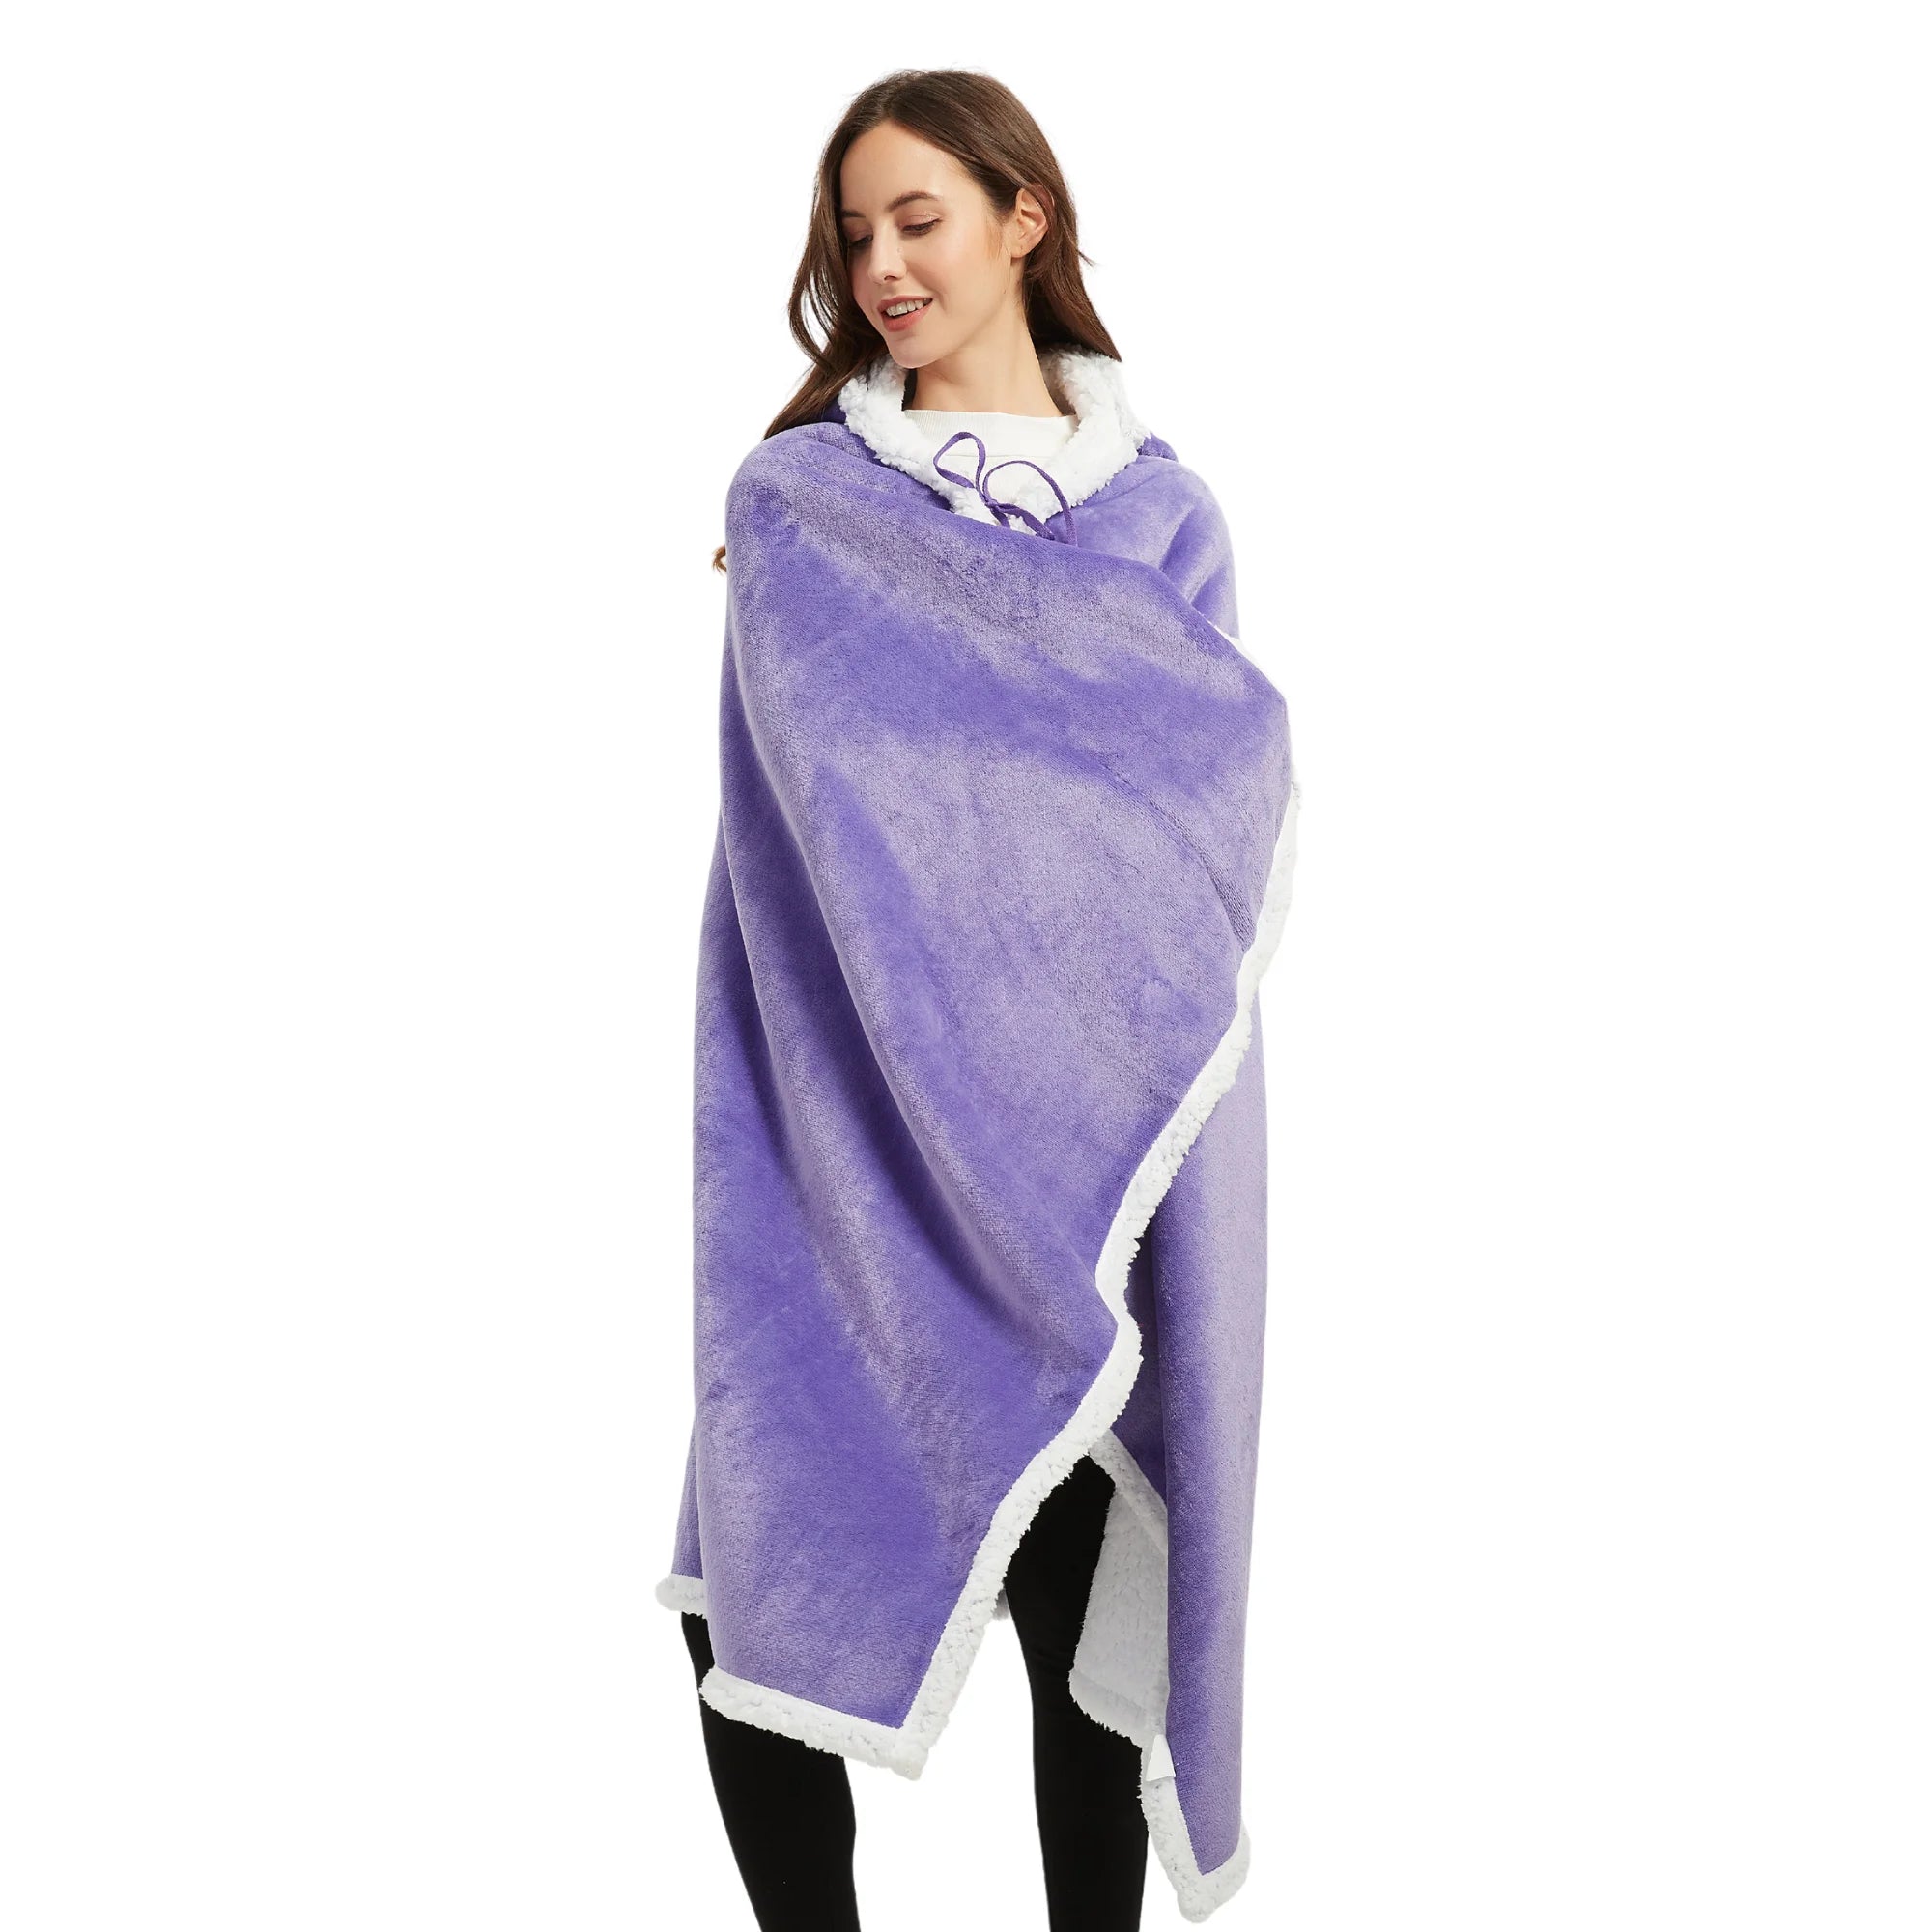 poncho plaid violet The Oversized Hoodie